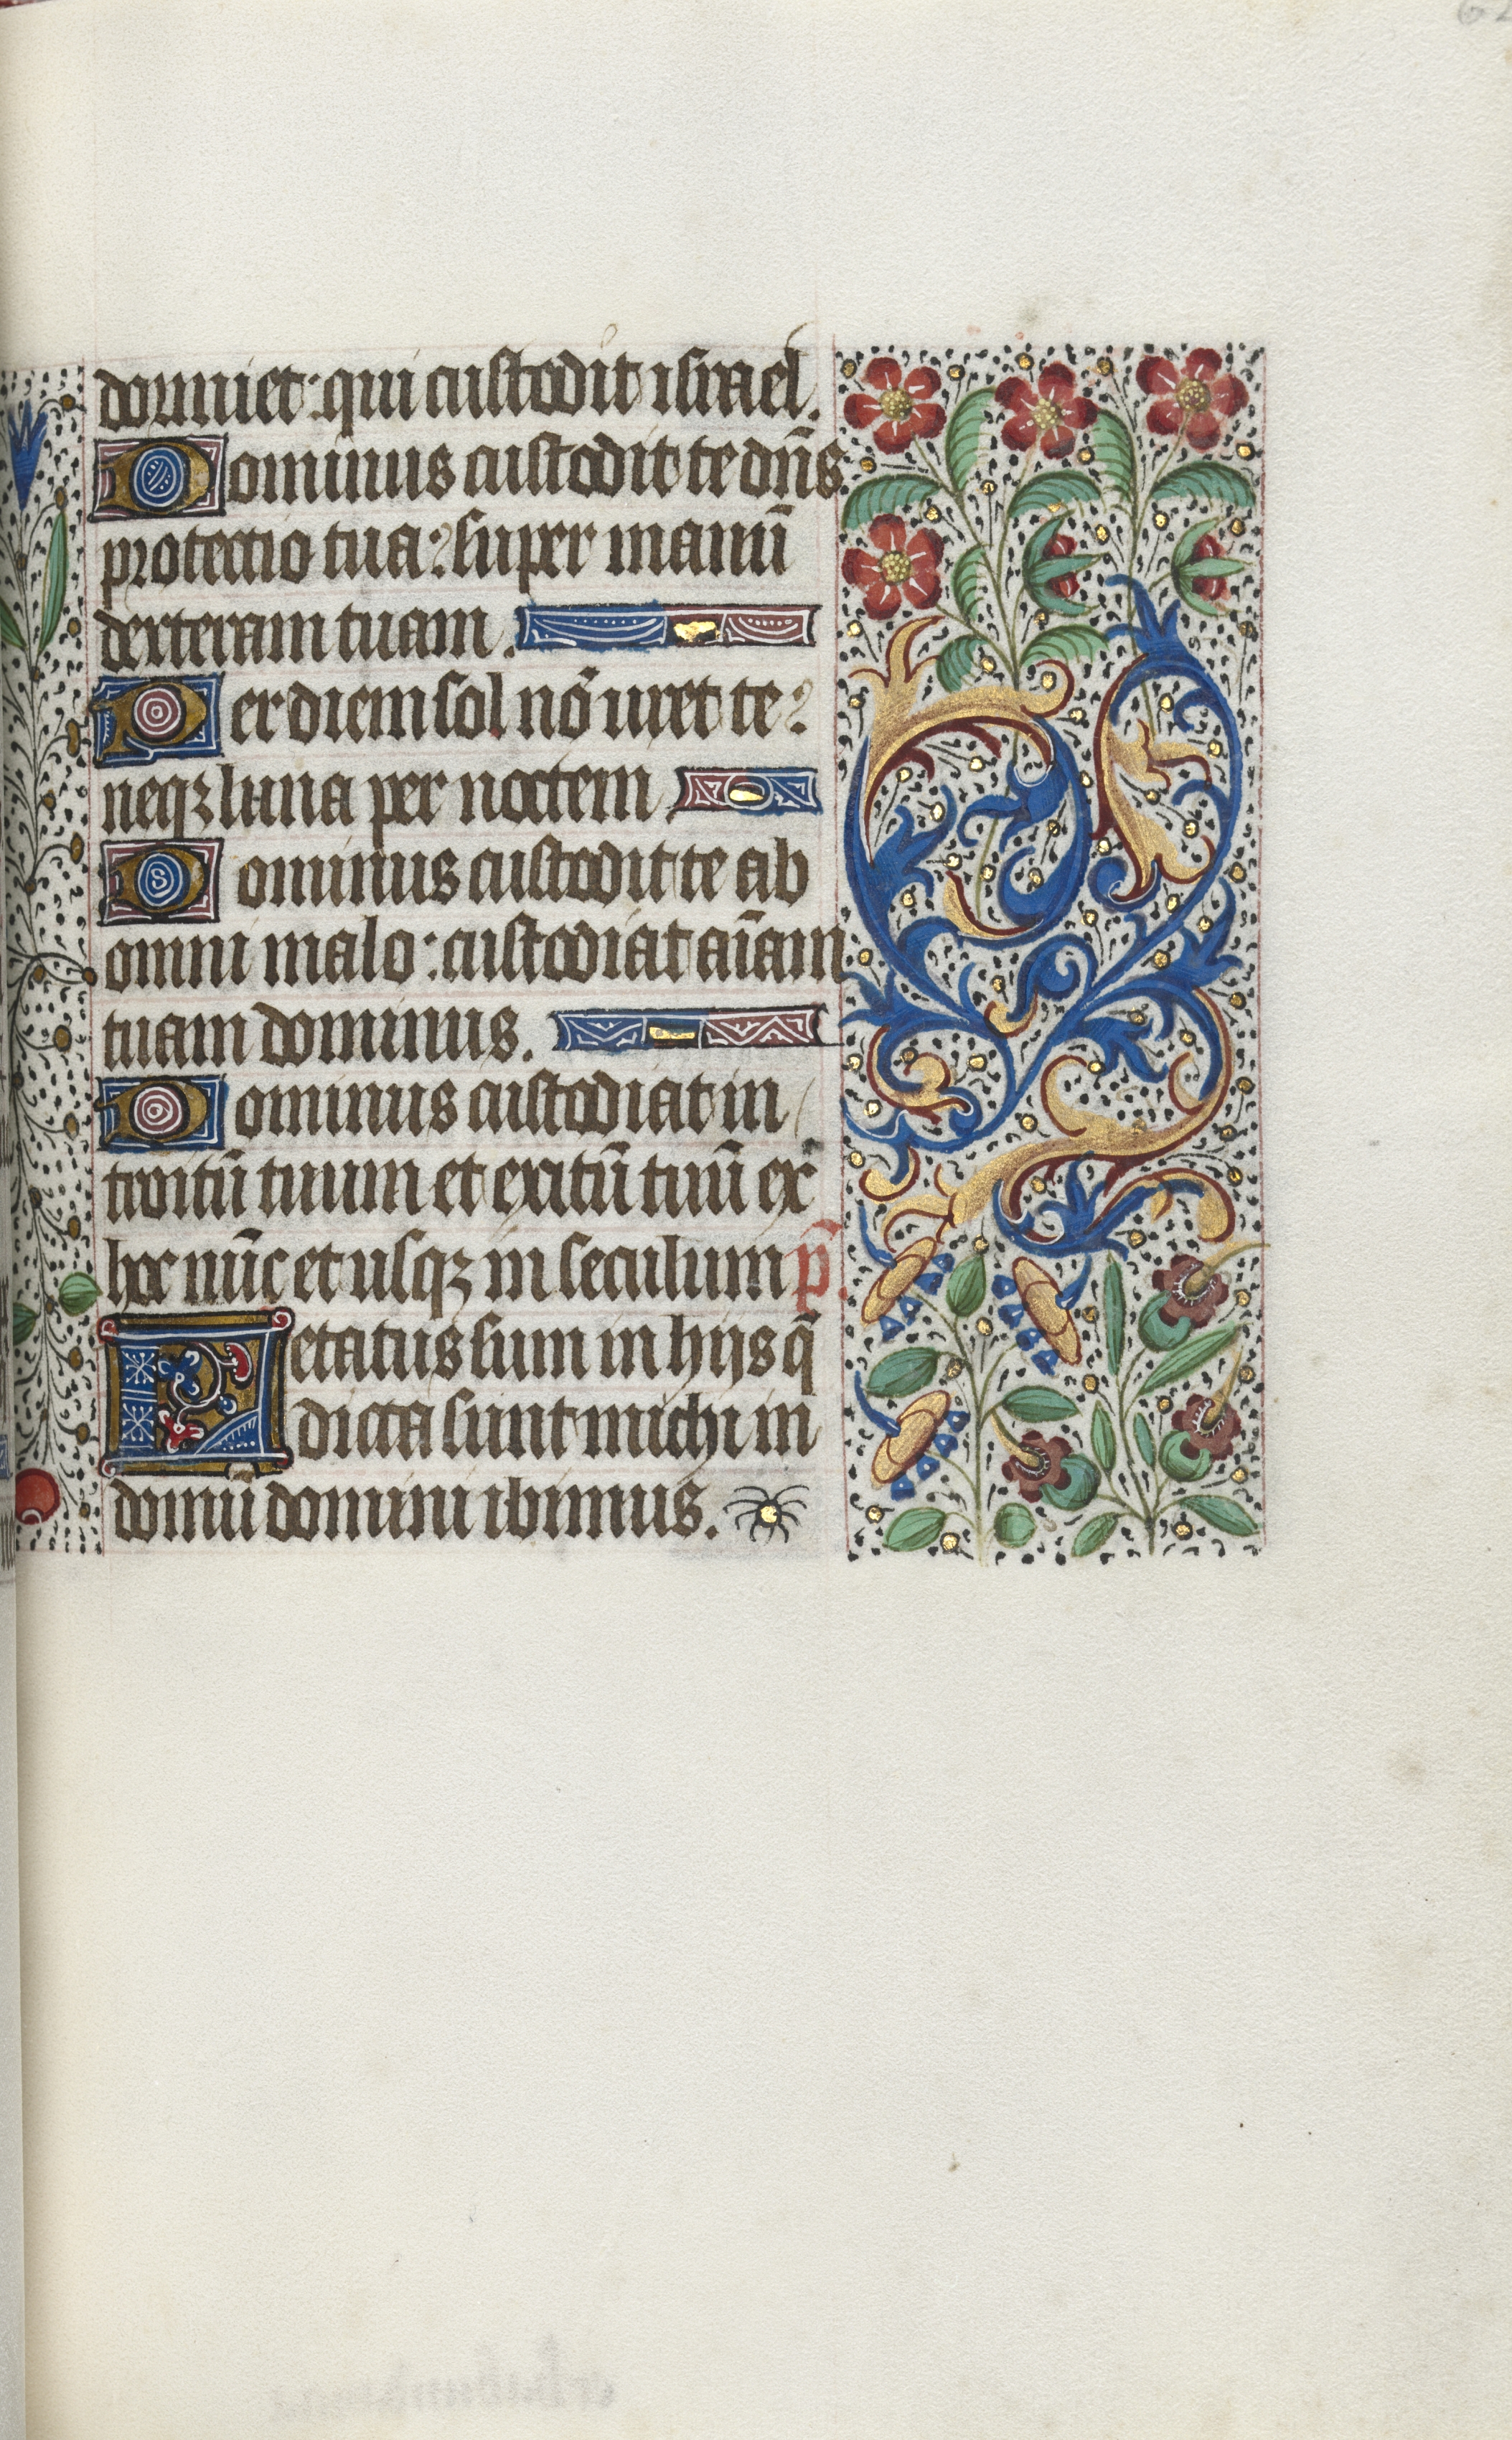 Book of Hours (Use of Rouen): fol. 62r